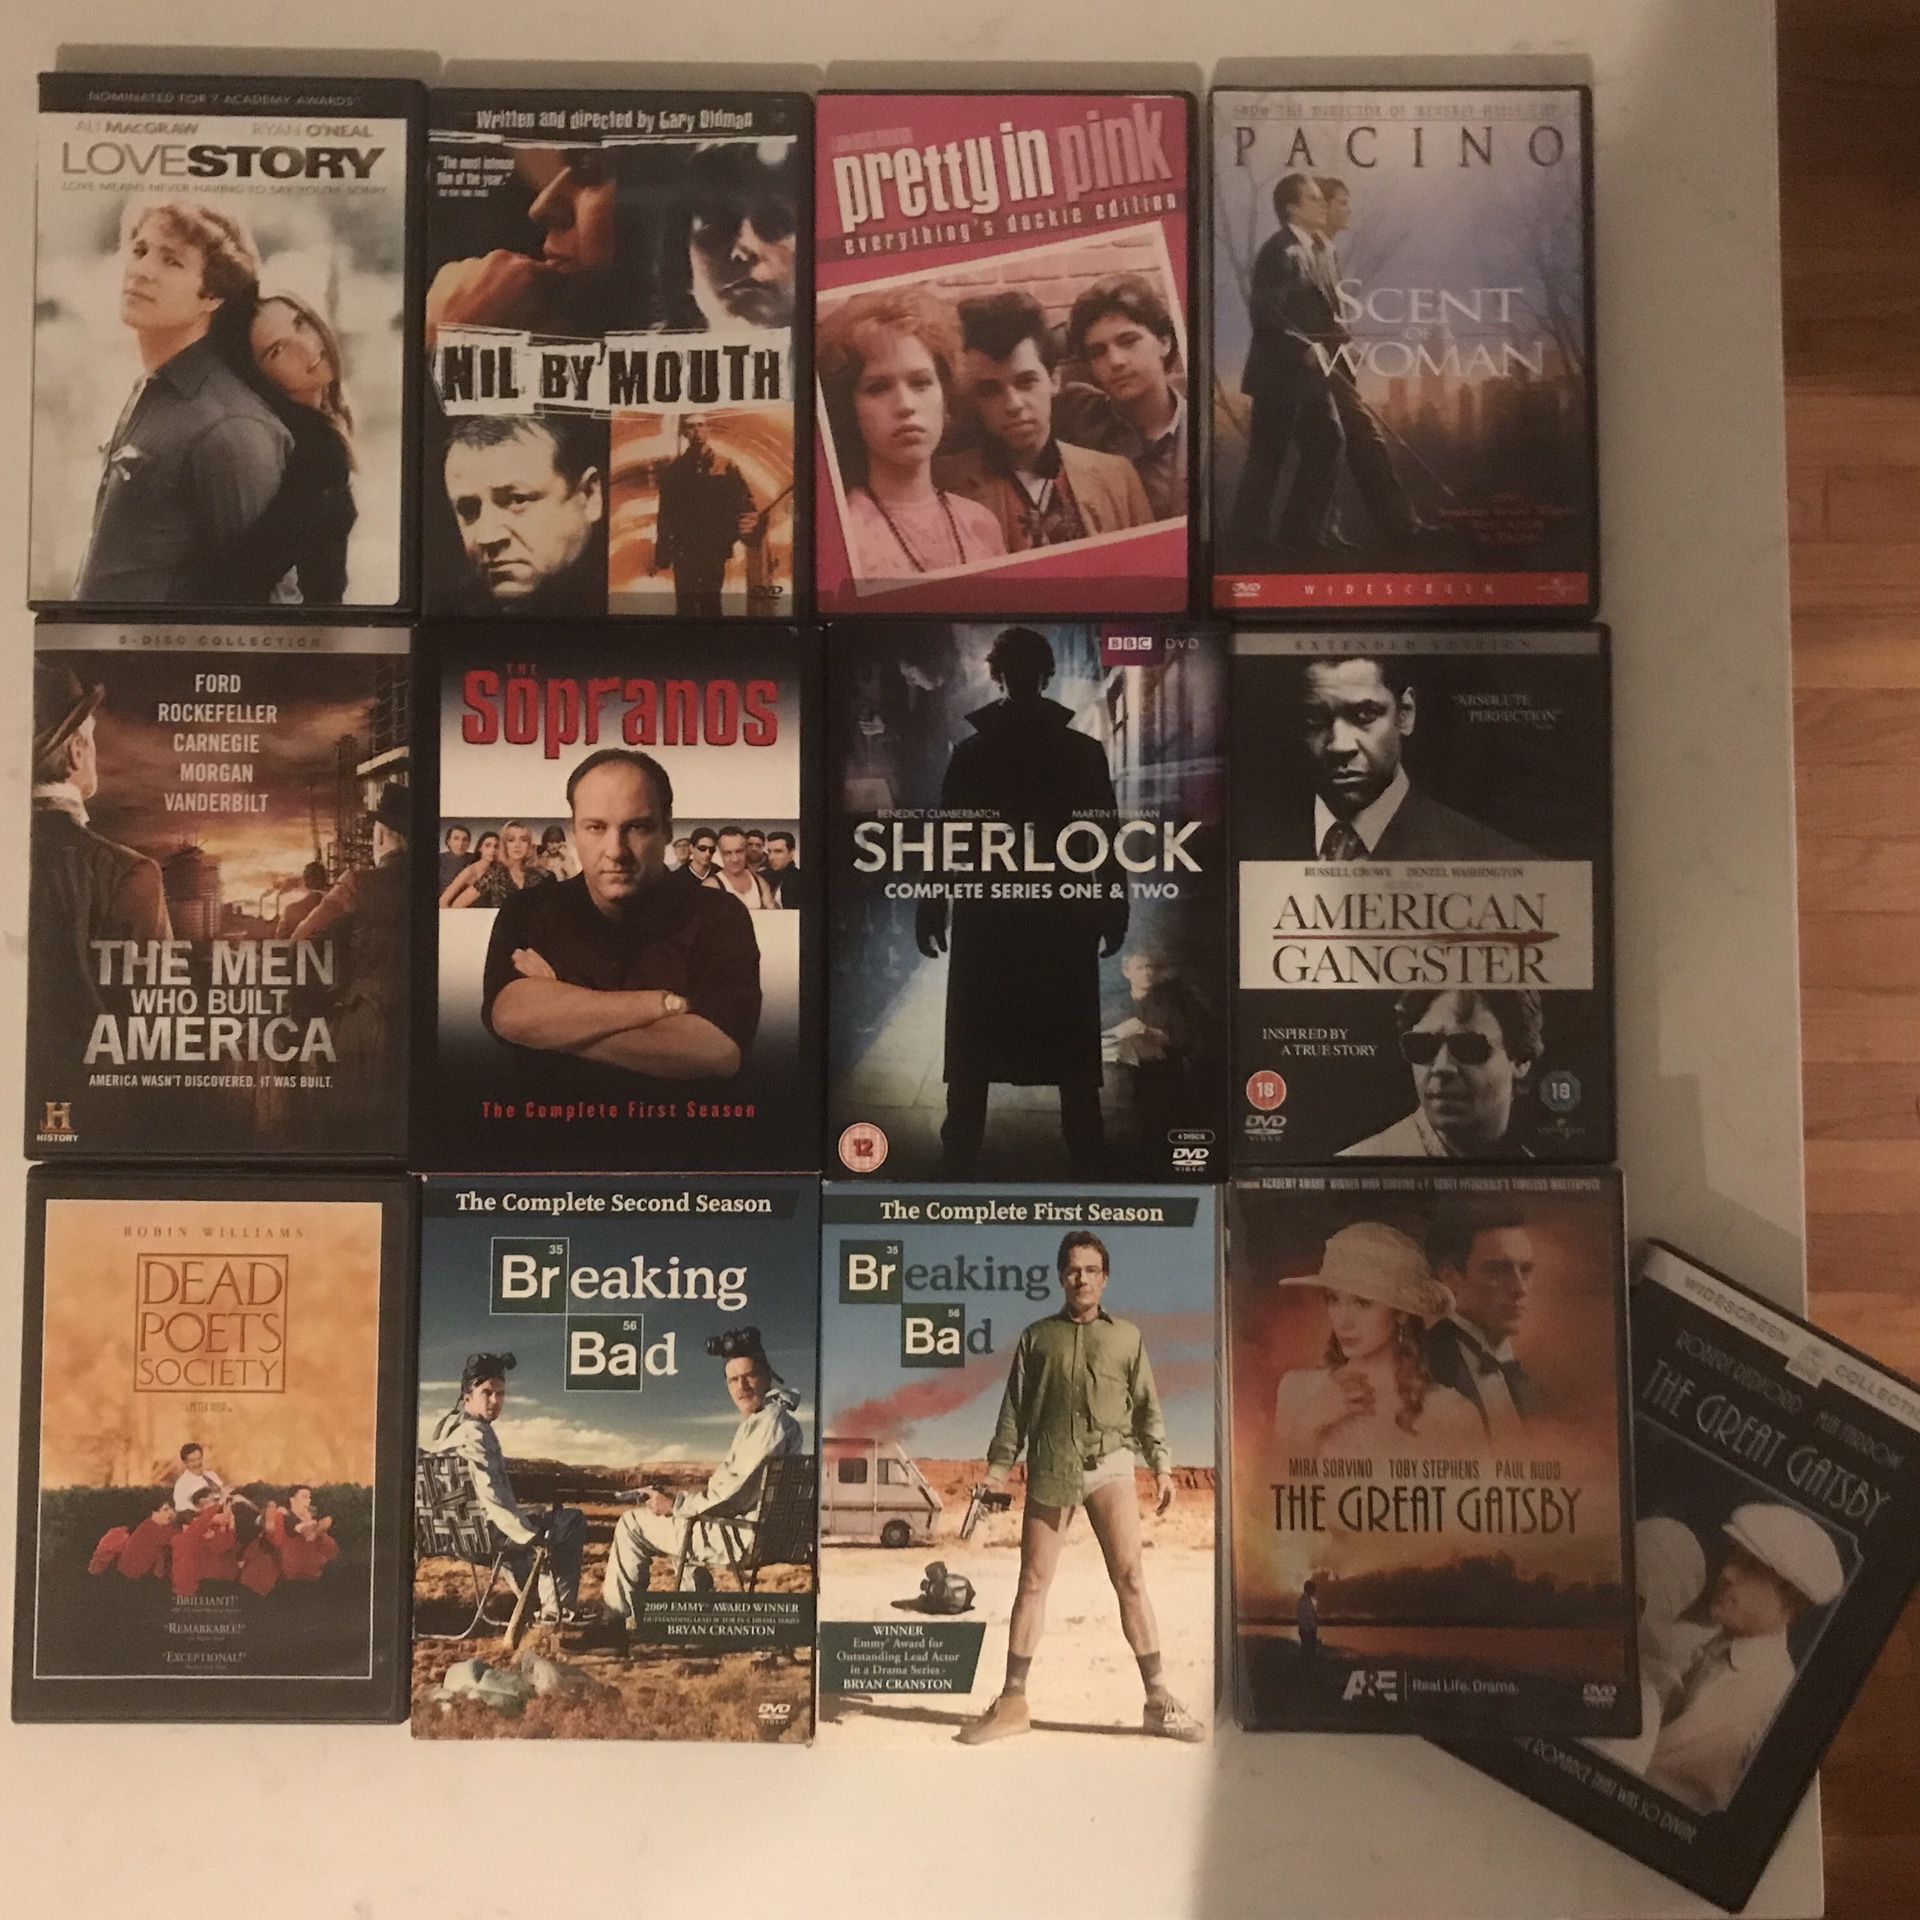 LARGE SELECTION OF DVDS INCLUDING BREAKING BAD, THE SOPRANOS, SHERLOCK HOLMES